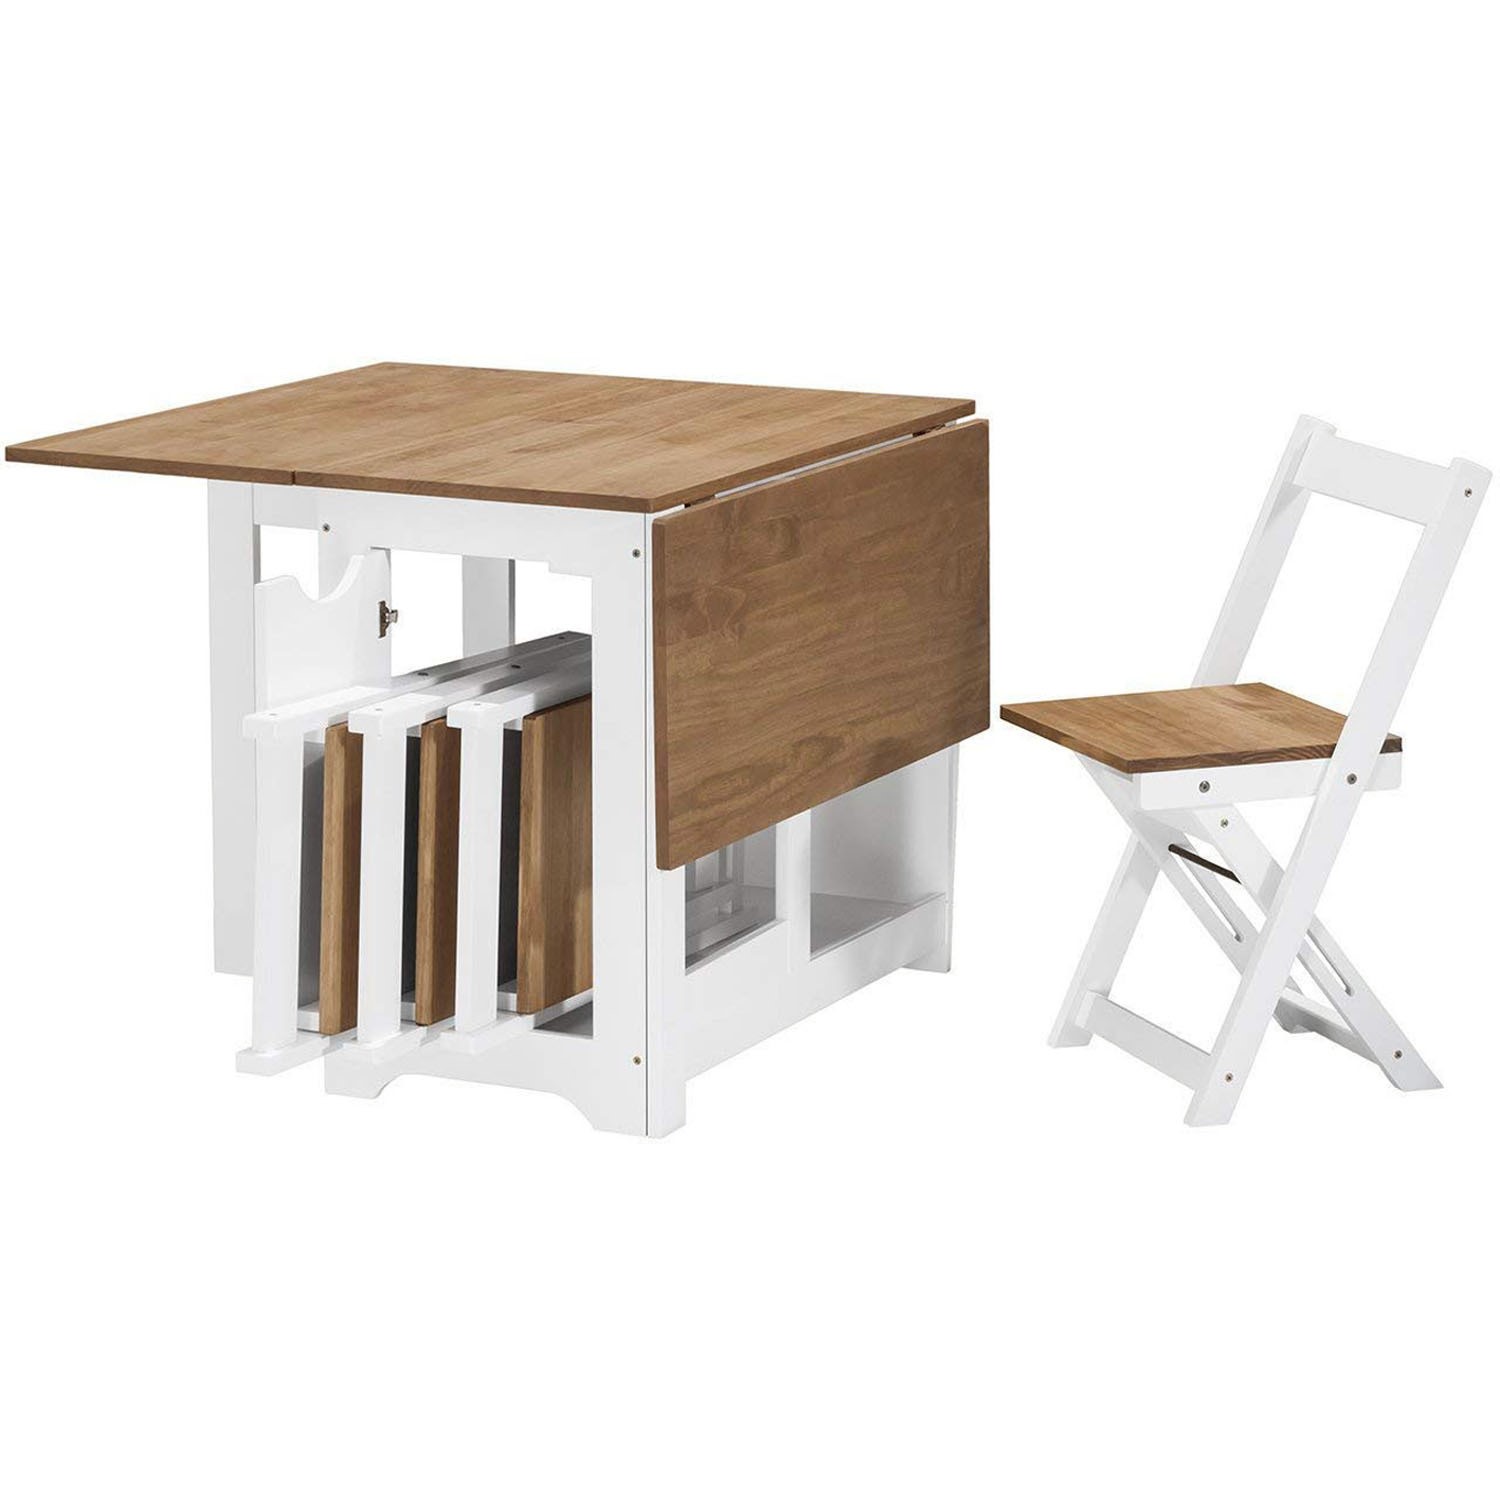 Photo of White and pine space saving dining table and chairs - seats 4 - santos